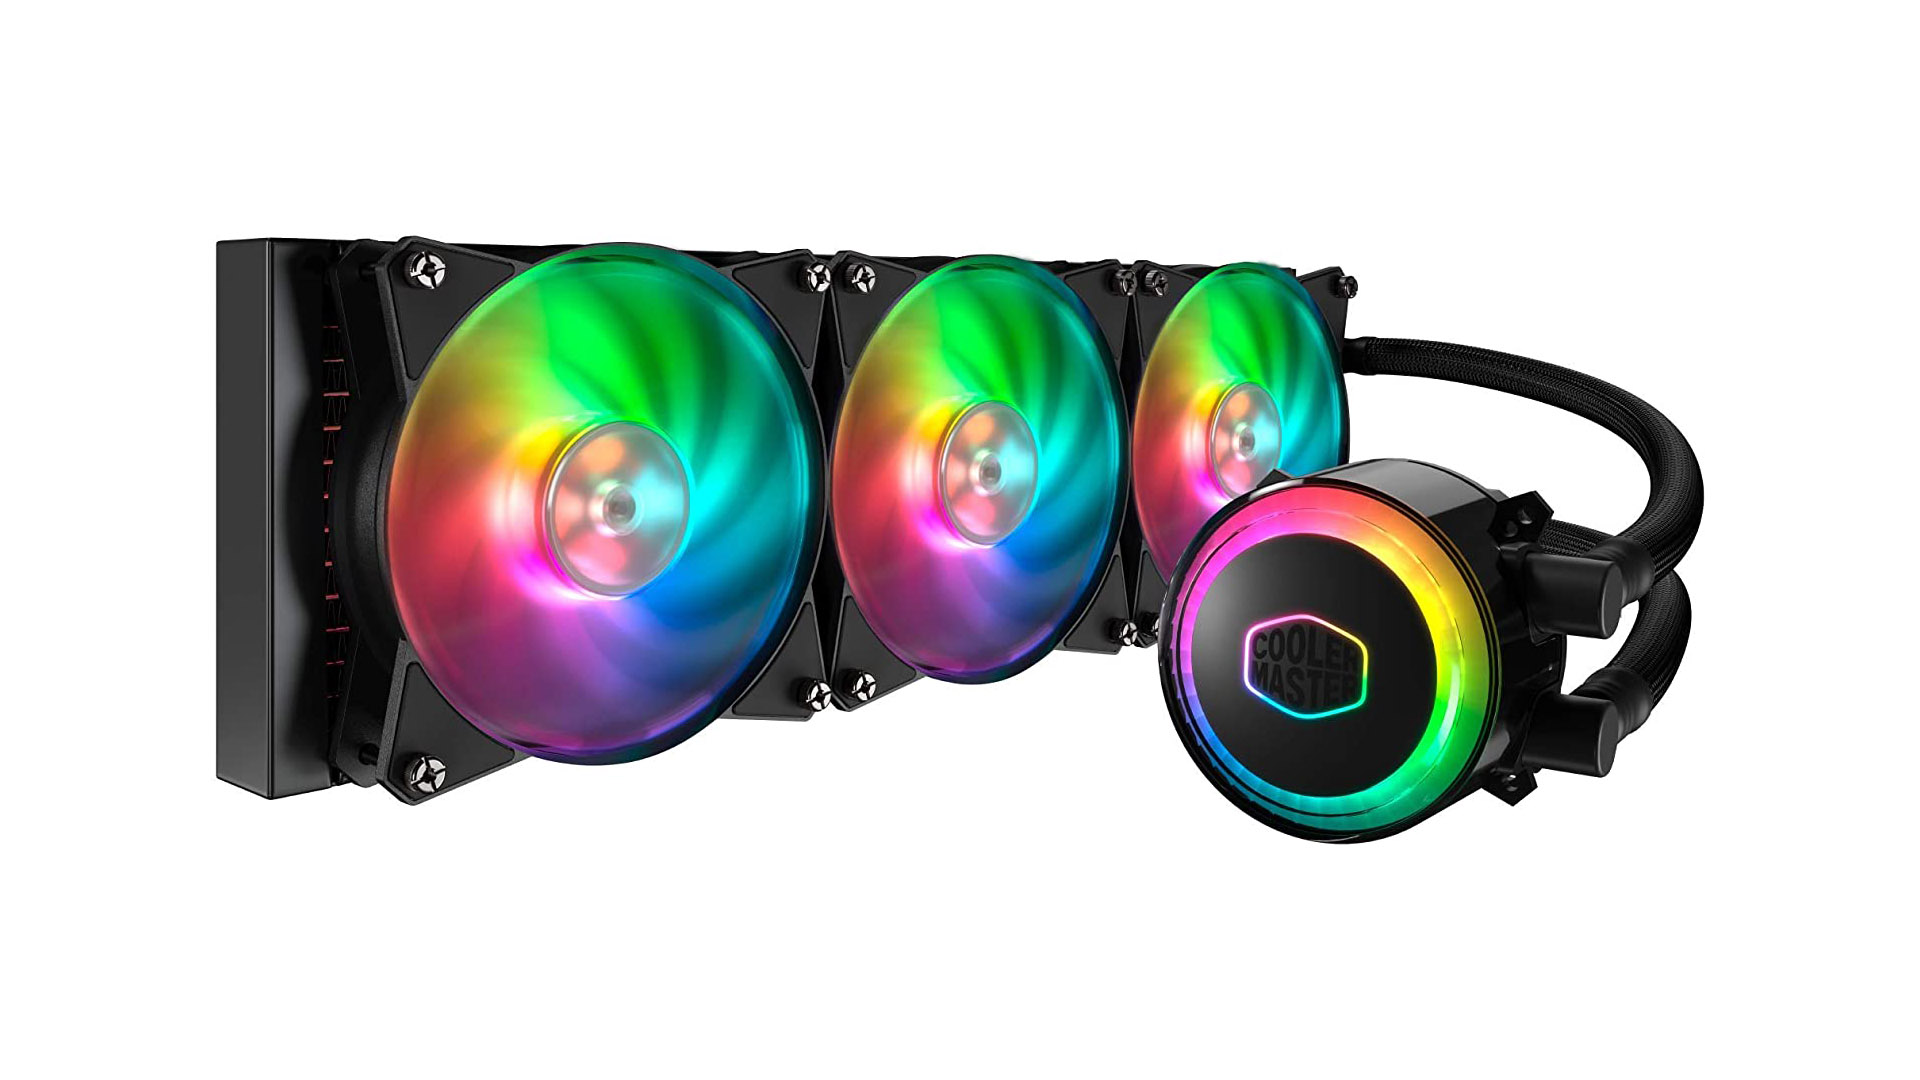 The Cooler Master MasterLiquid ML360R illuminates the fans and pump with colorful RGB lights against a white background.